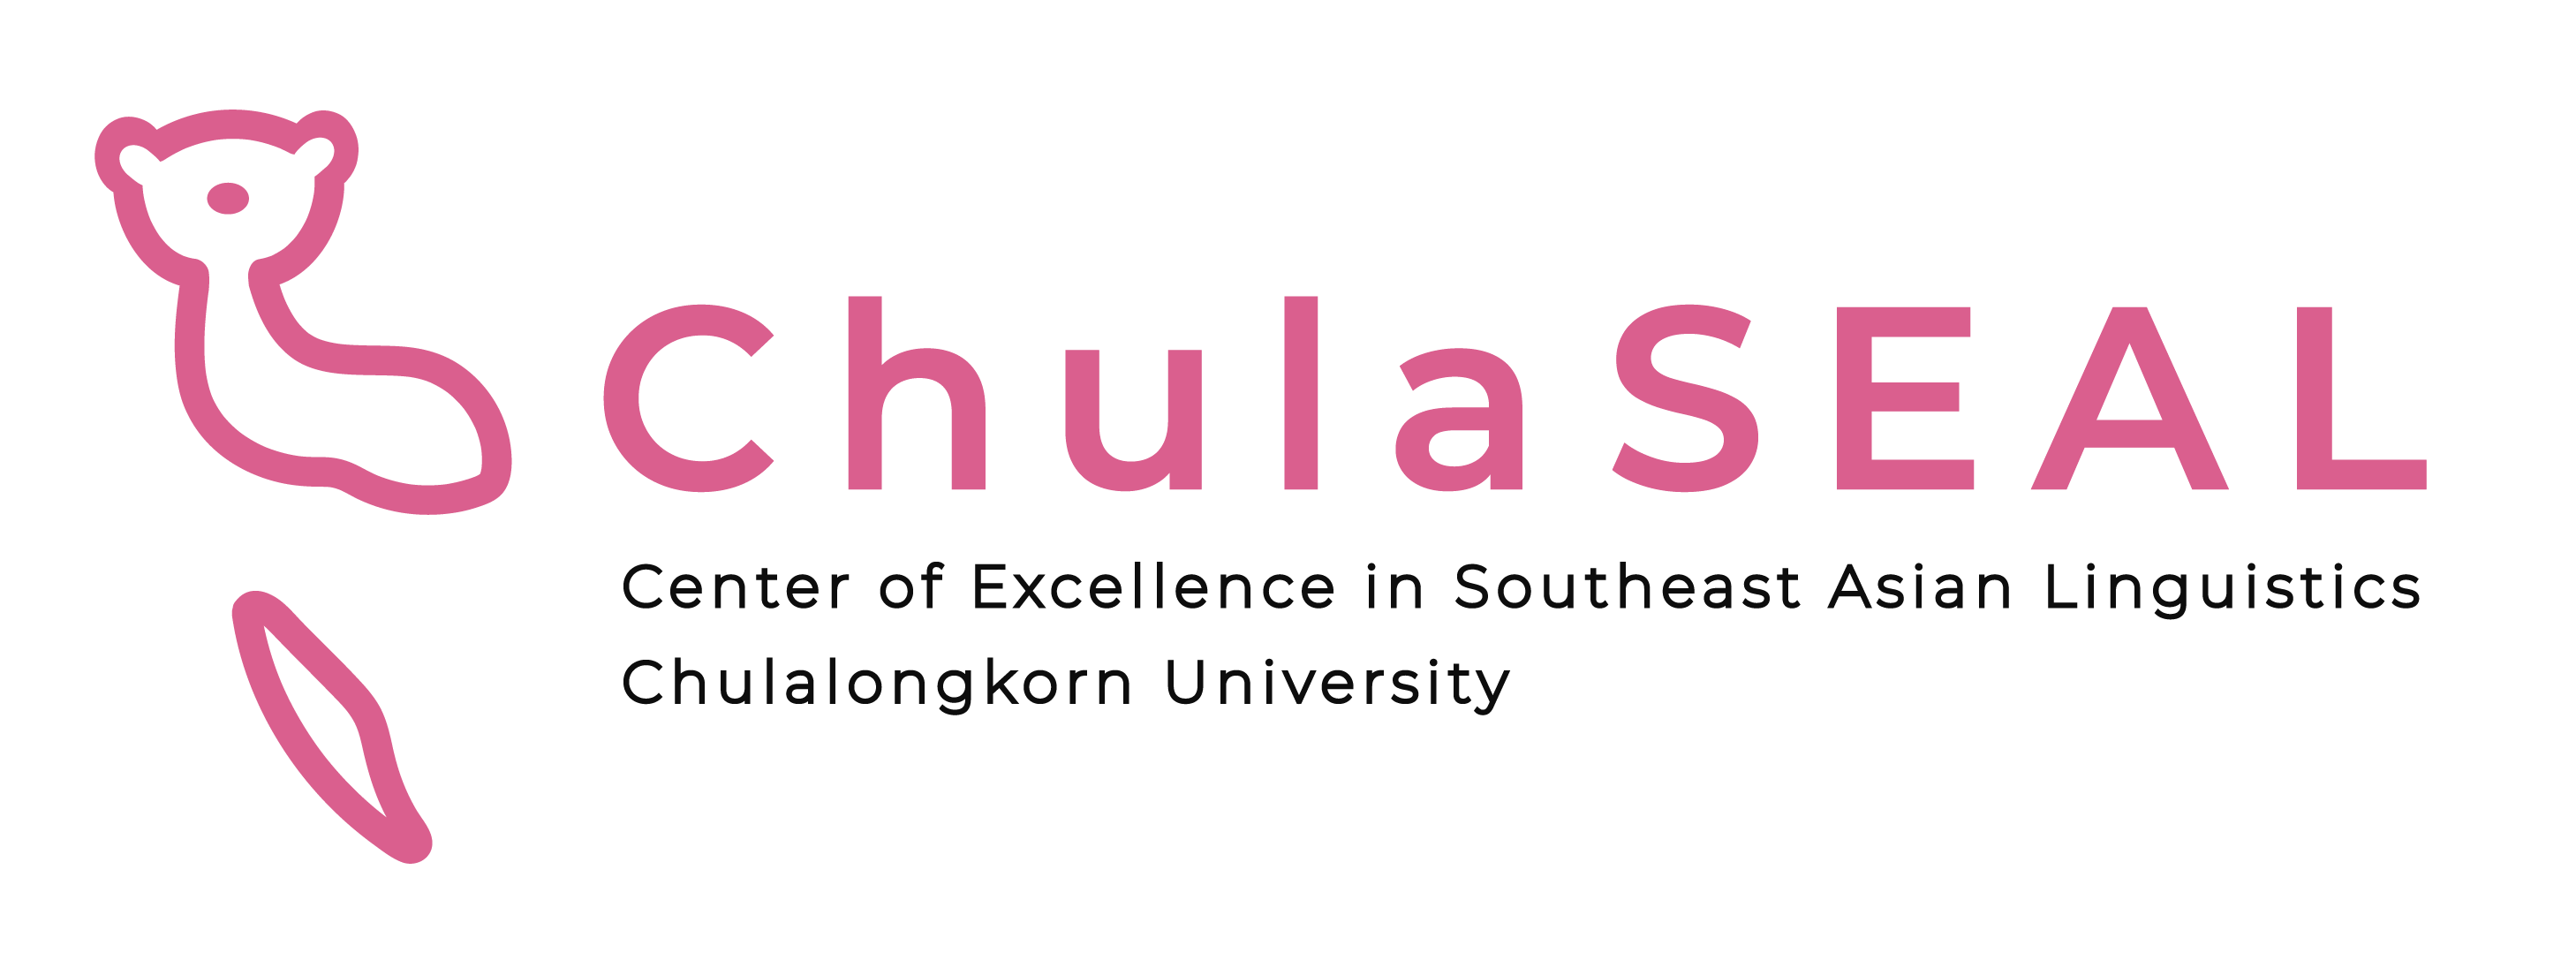 Center of Excellence in Southeast Asian Linguistics